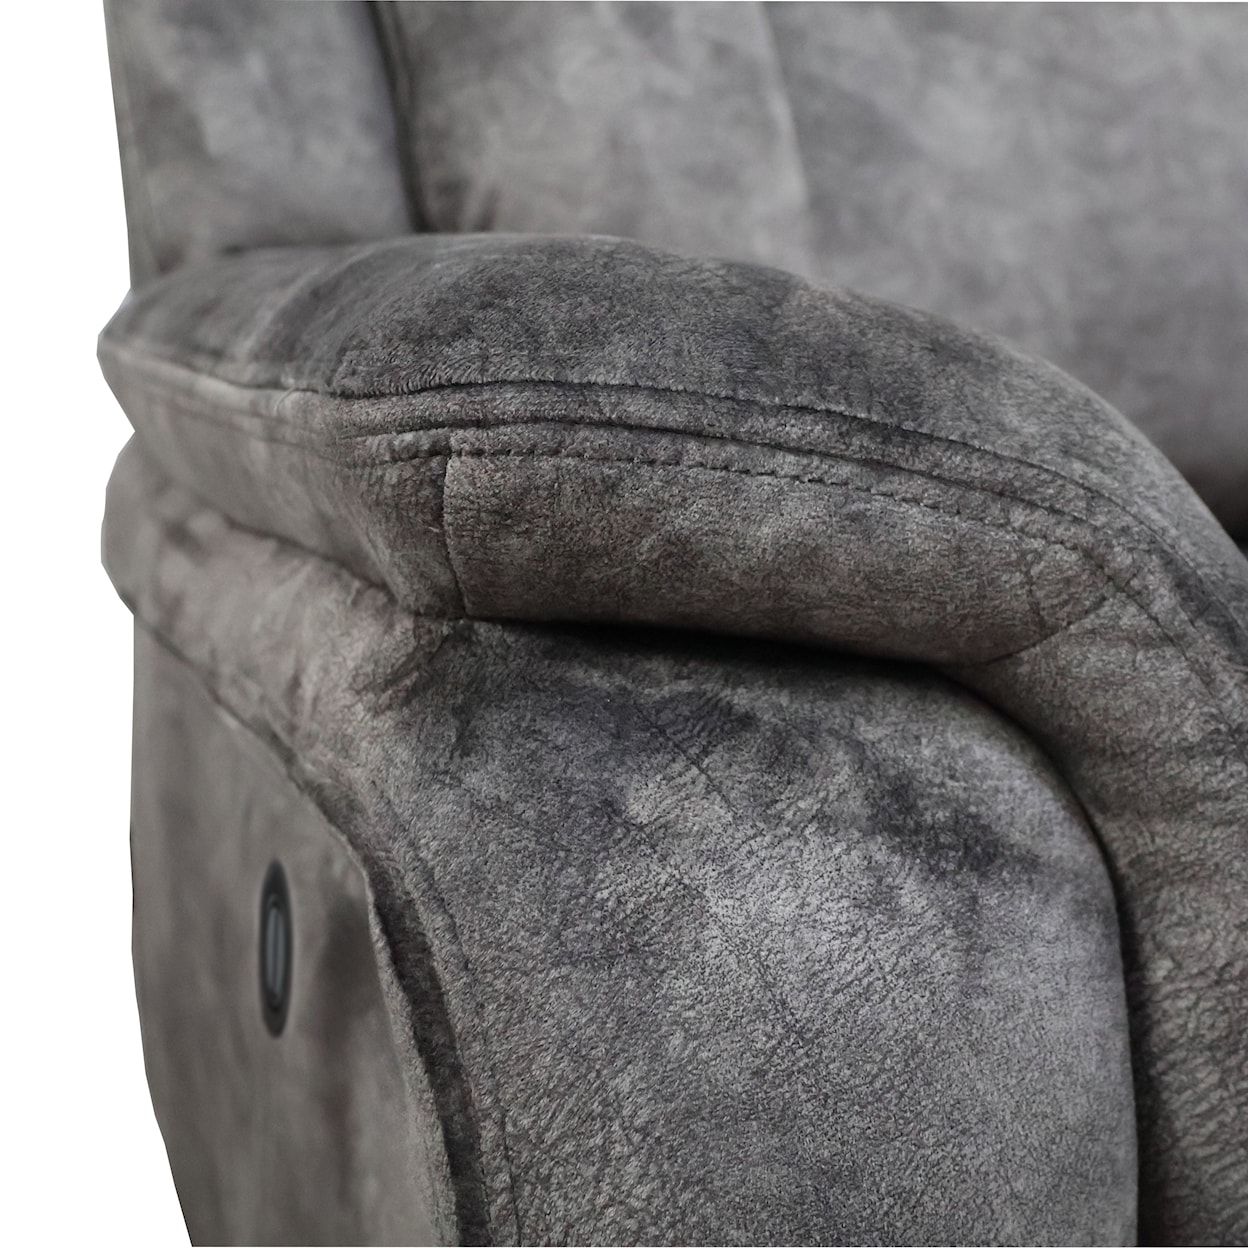 New Classic Park City Upholstered Dual Reclining Loveseat